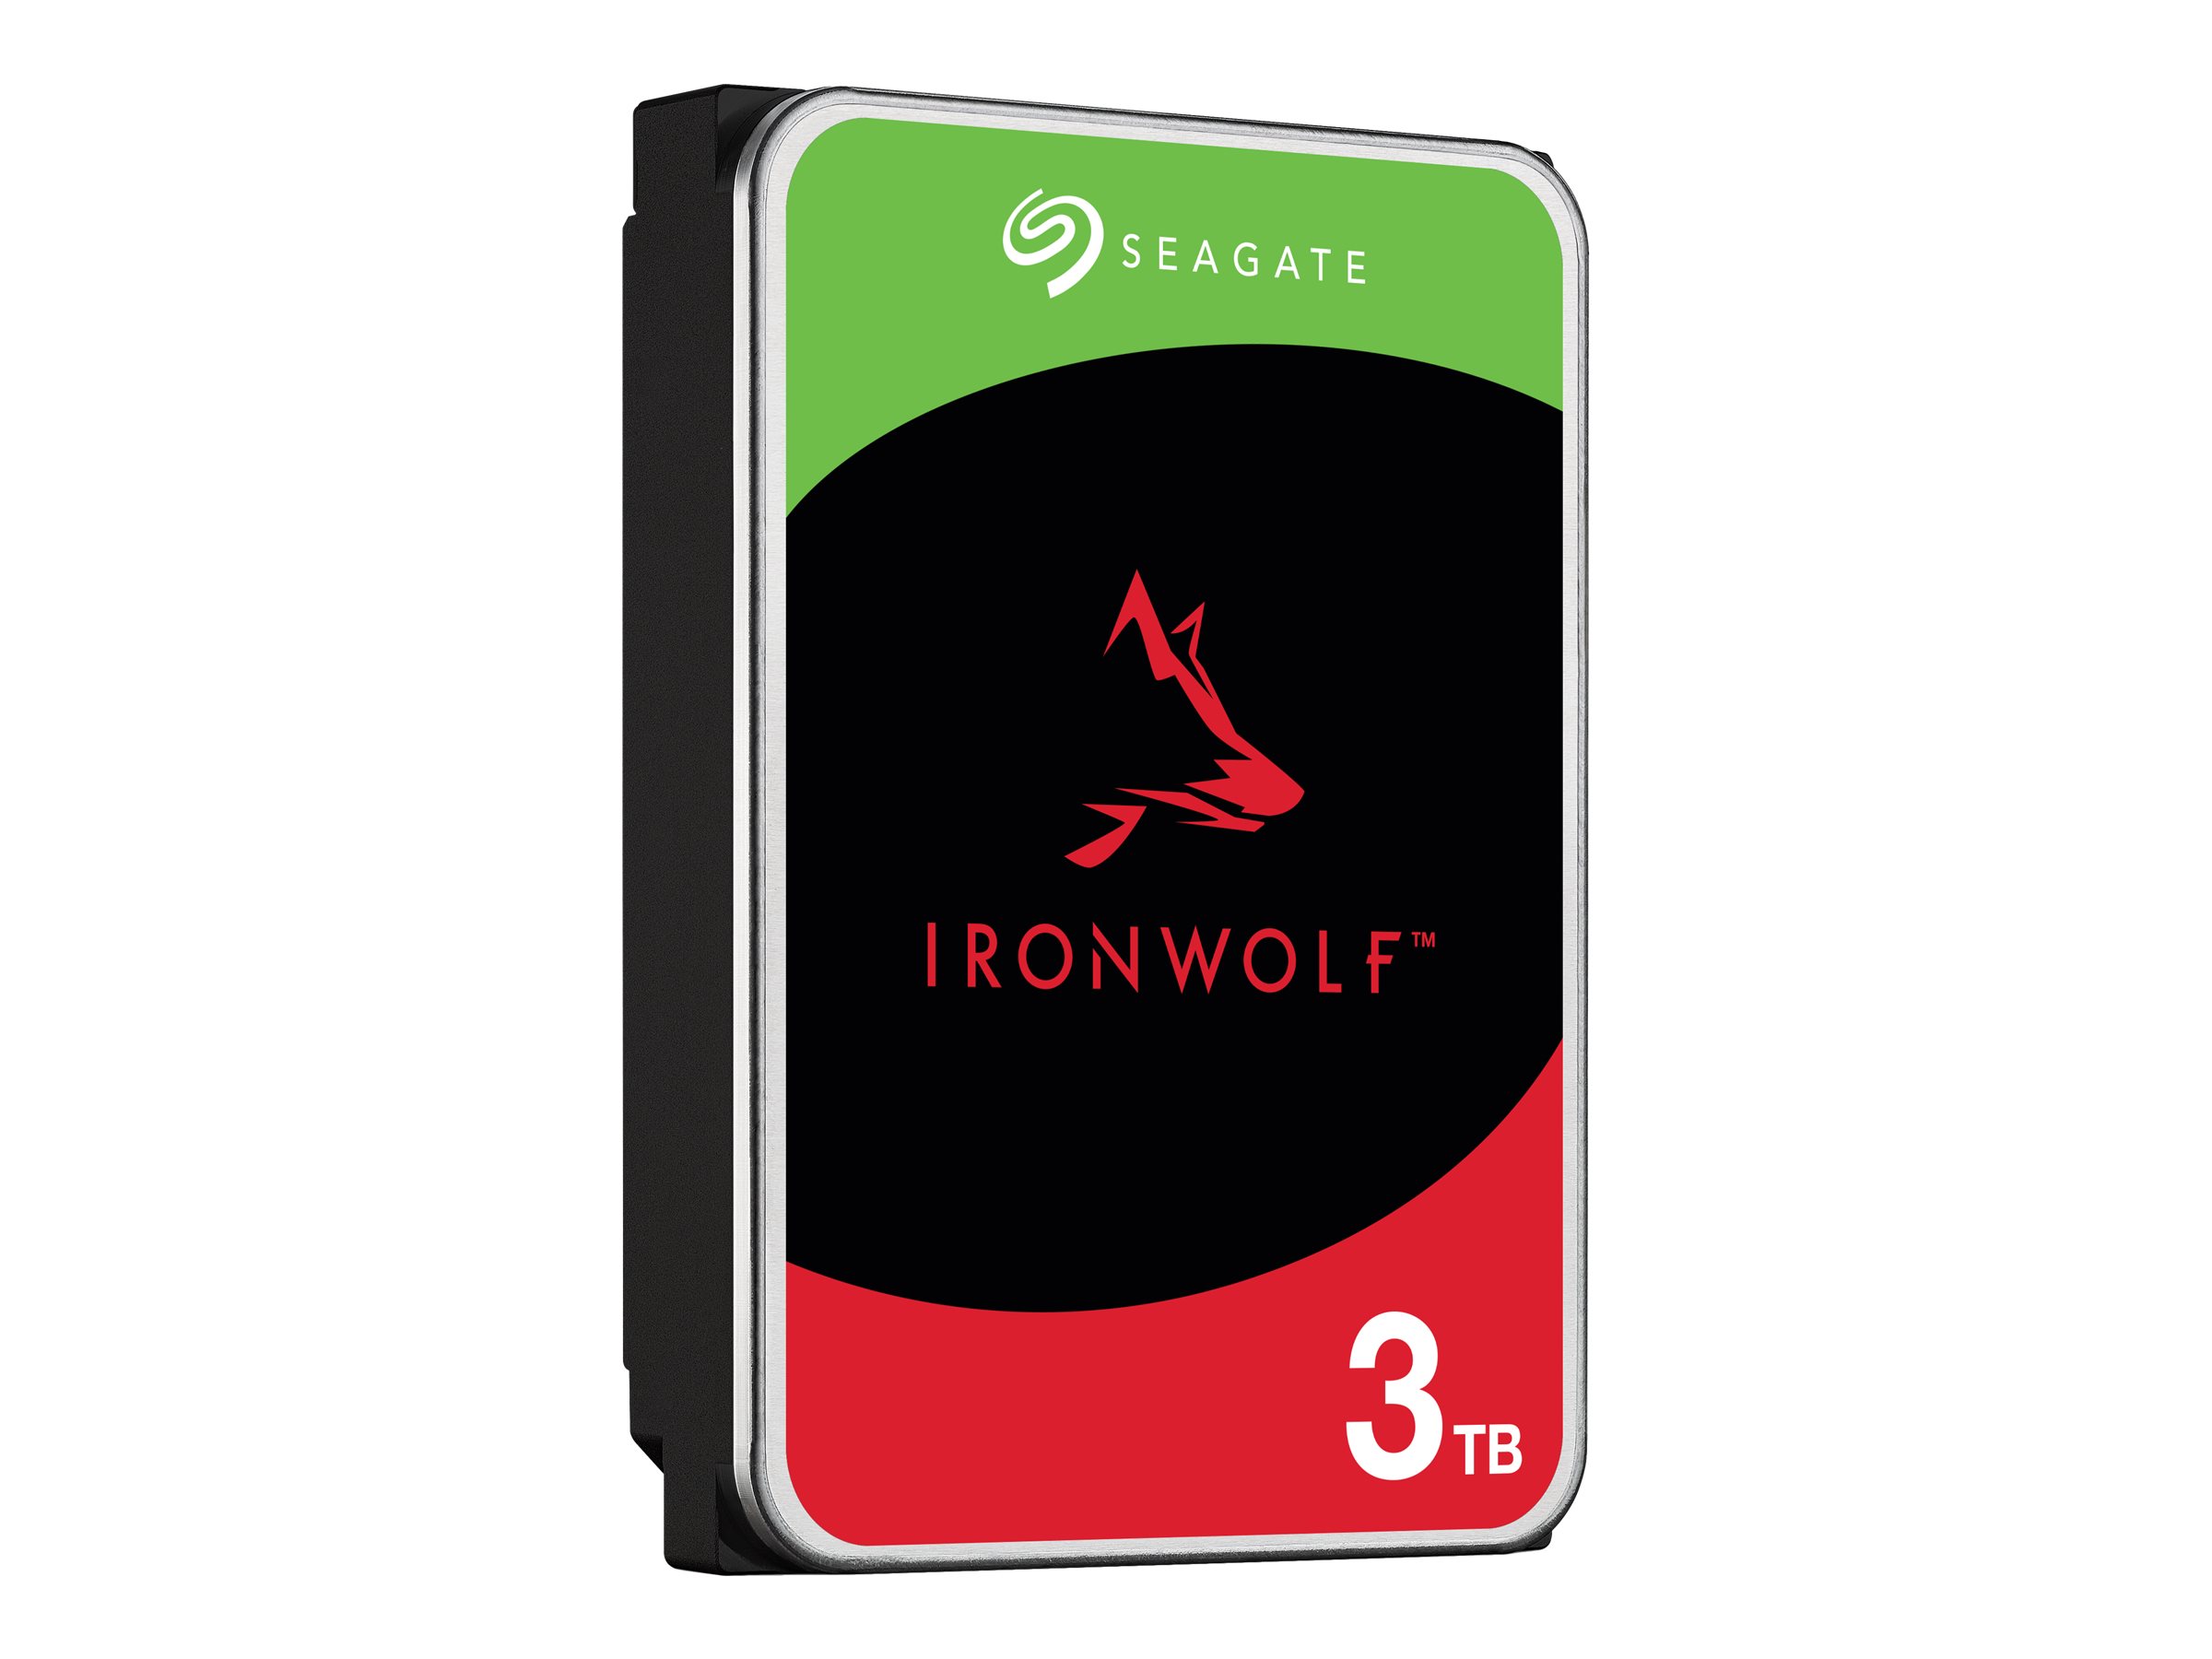 Seagate IronWolf ST3000VN006 - Disque dur - 3 To - interne - SATA 6Gb/s - 5400 tours/min - mémoire tampon : 256 Mo - avec 3 ans de Seagate Rescue Data Recovery - ST3000VN006 - Disques durs internes